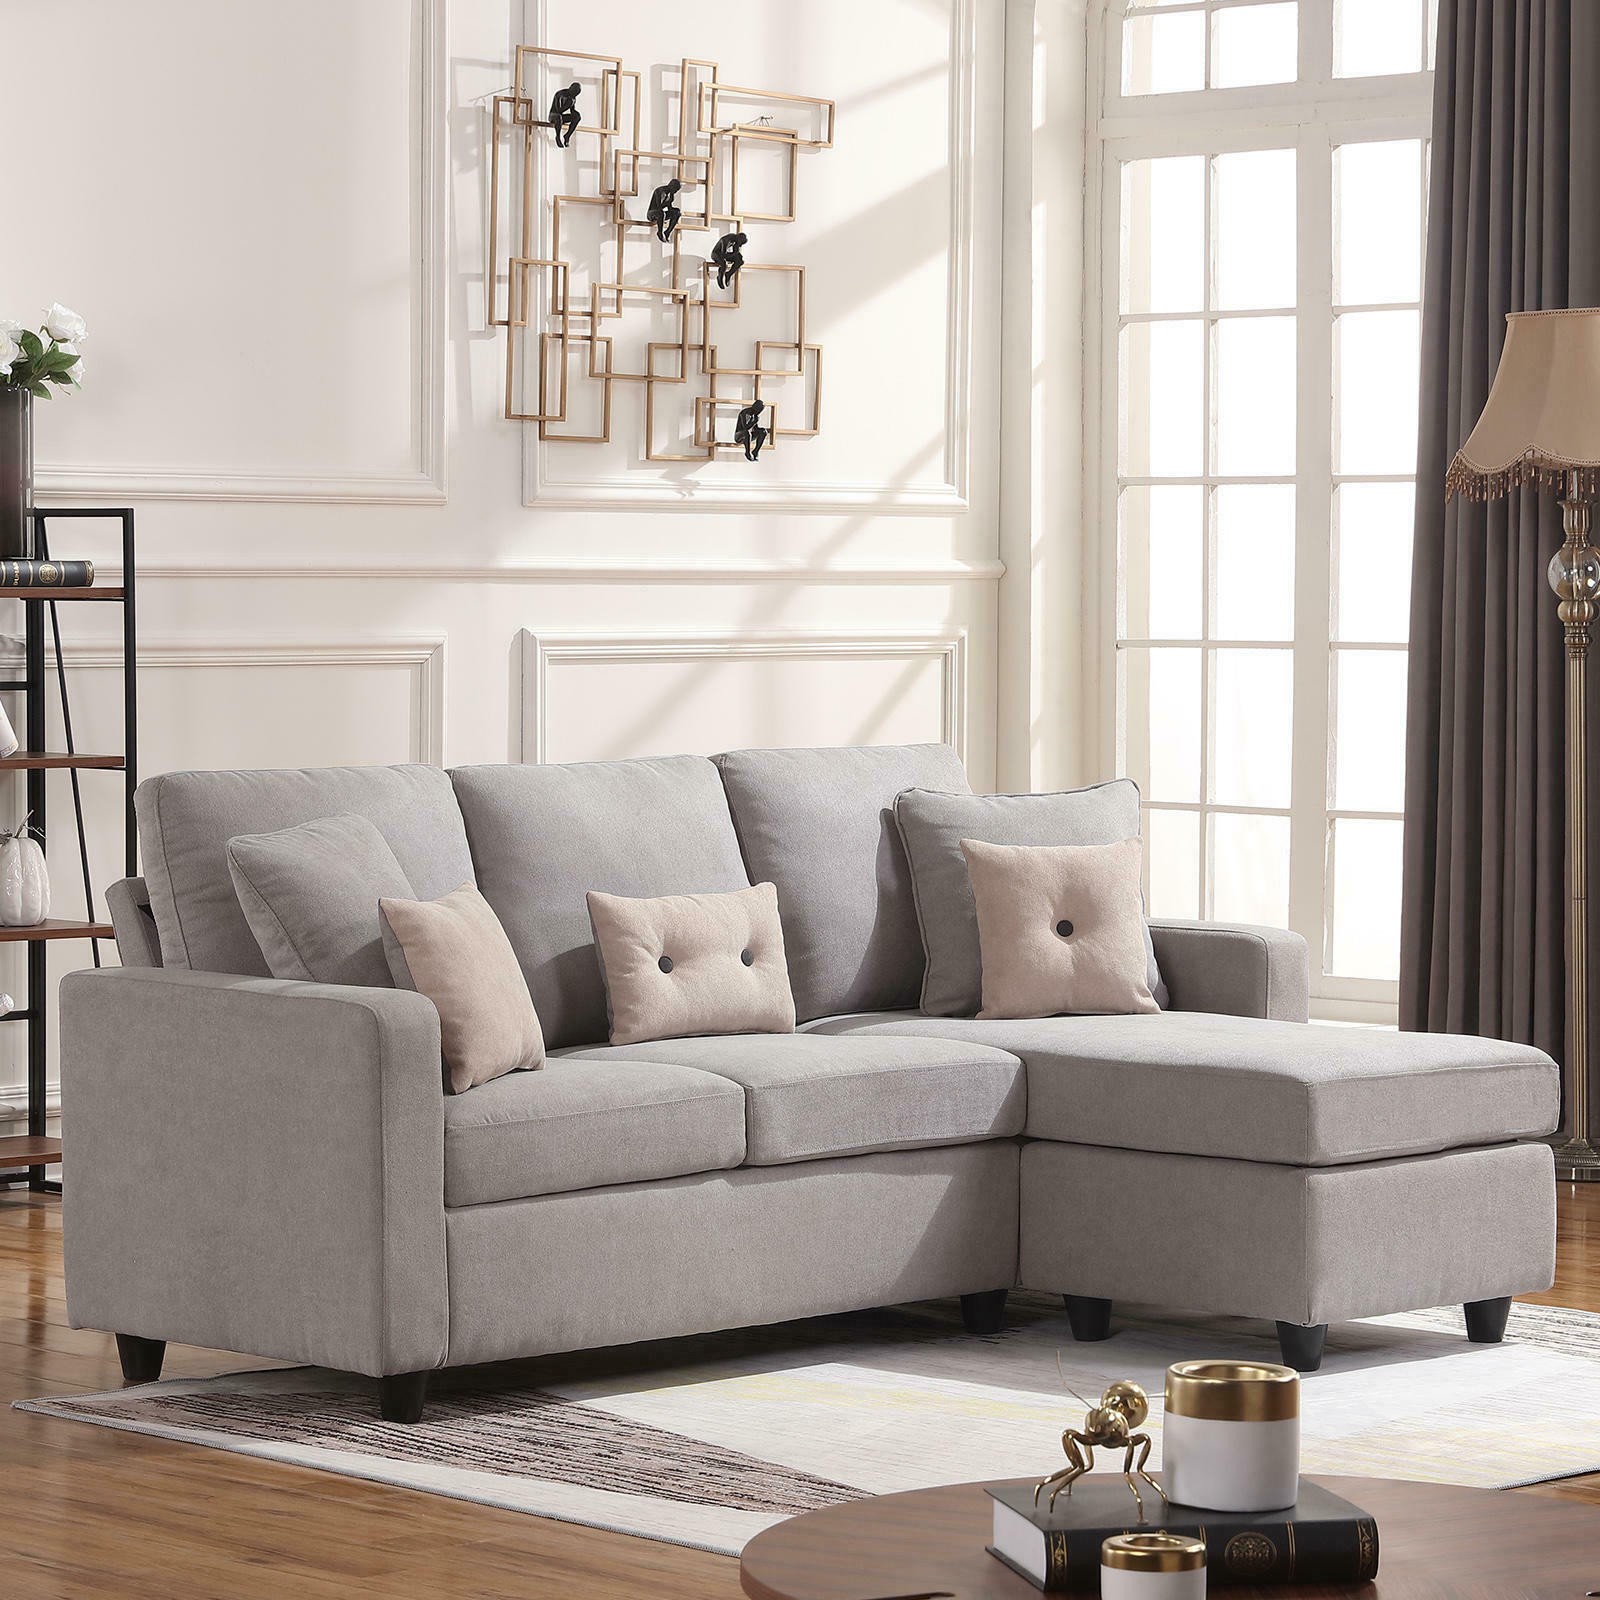 Light grey sectional fabric sofa l shaped couch w